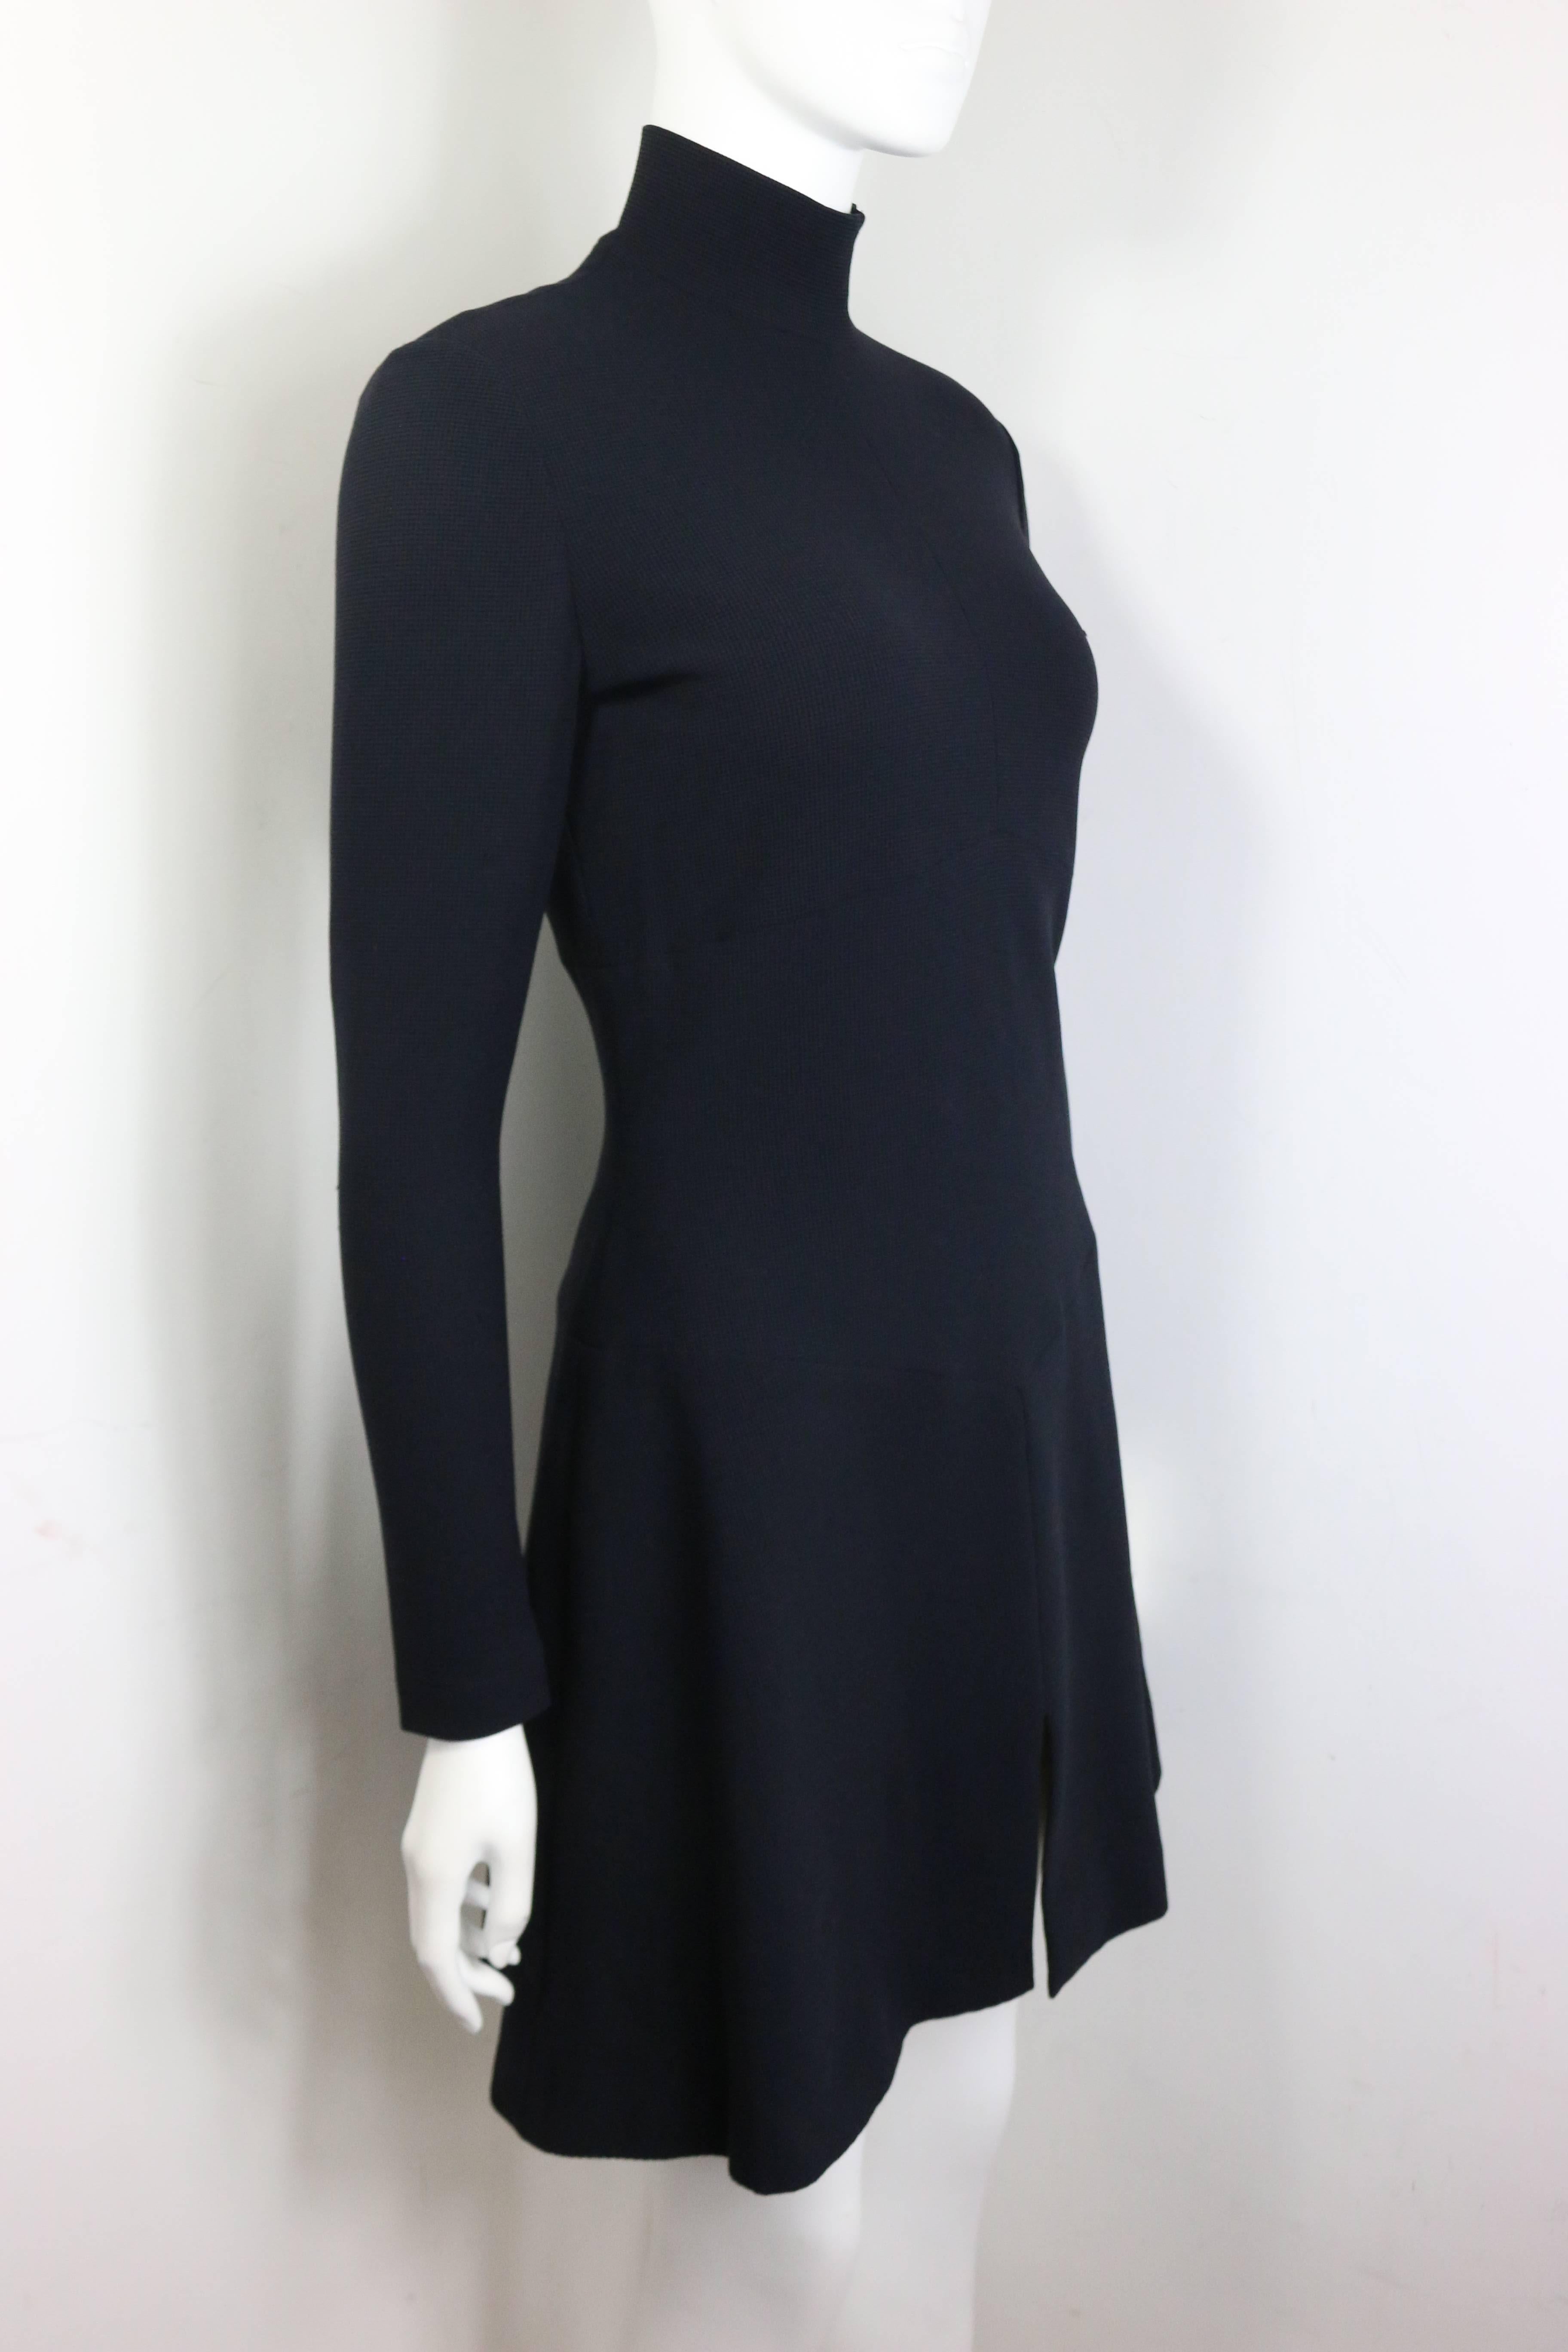 - Vintage Chanel black high neck long sleeves dress from 1995 pre collection. Featuring slit on the bottom in the front, a neck side zipper and body side zipper closure. A classic Chanel long sleeves stretchy A-Shape dress is a great choice for a